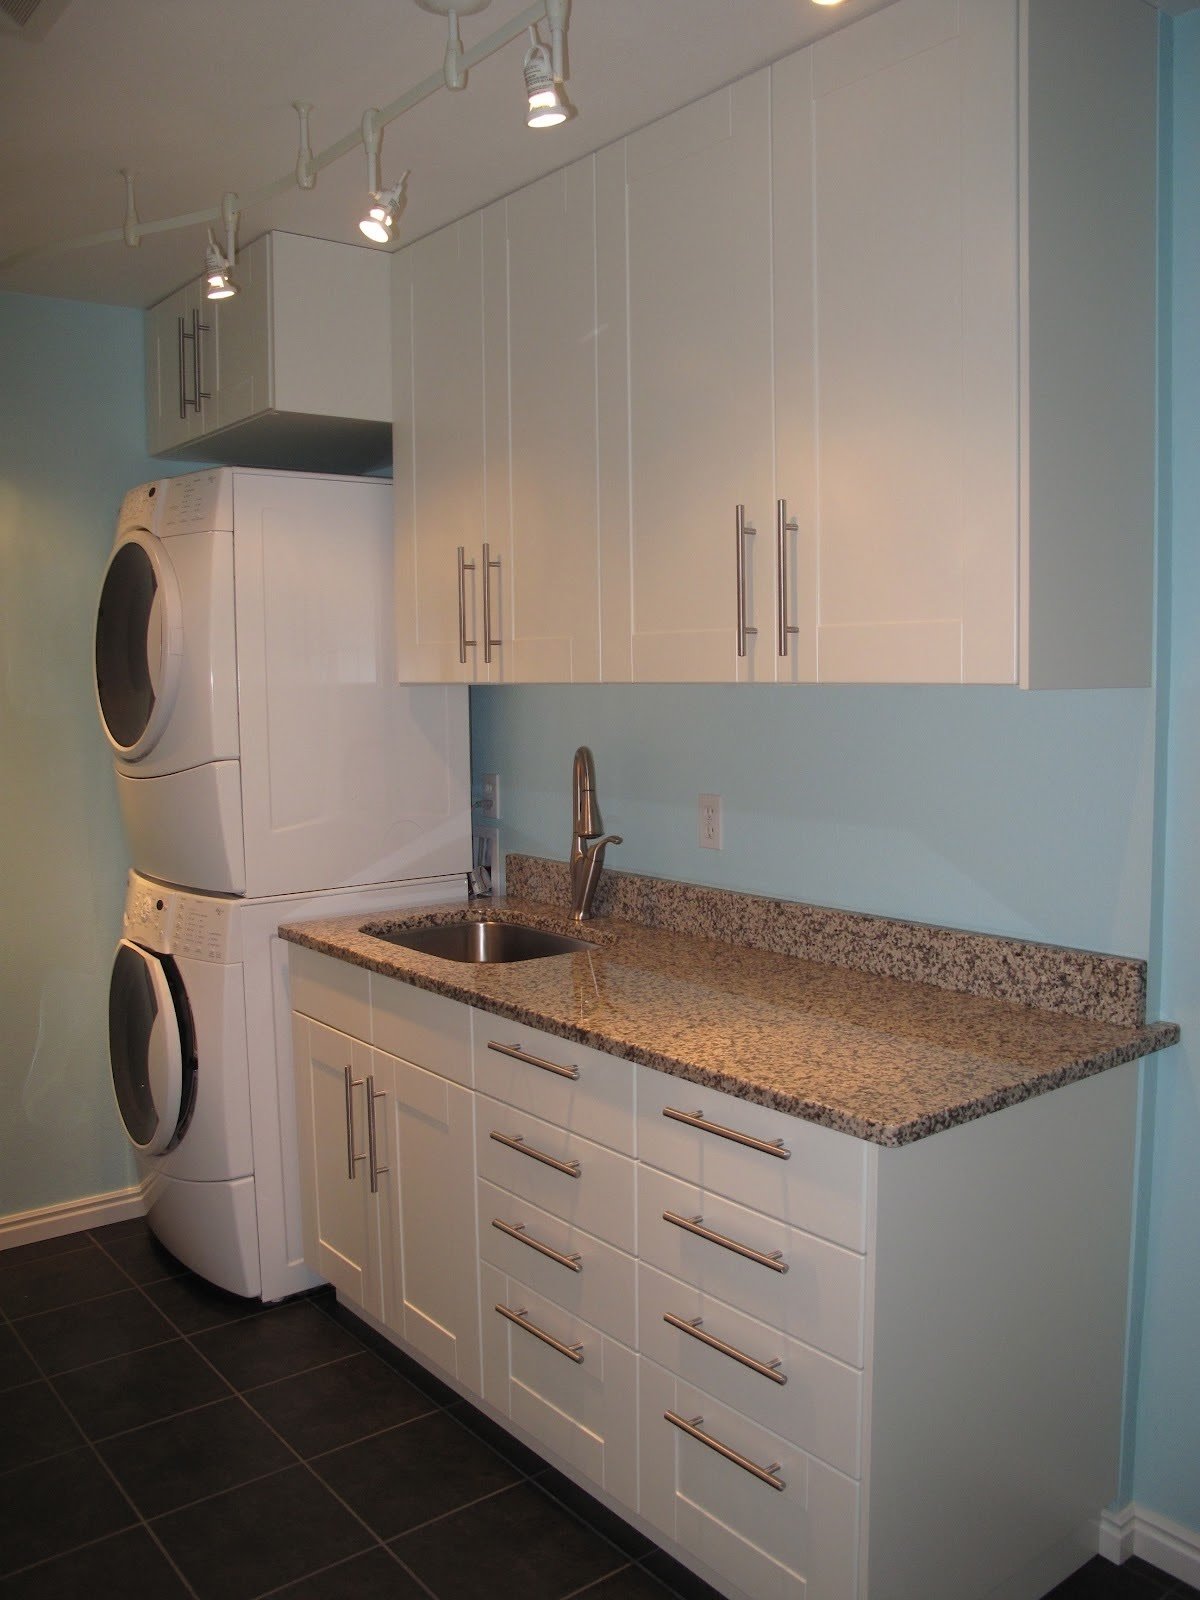 Laundry Room Sink Cabinet You Ll Love, Laundry Room Base Cabinets With Sink